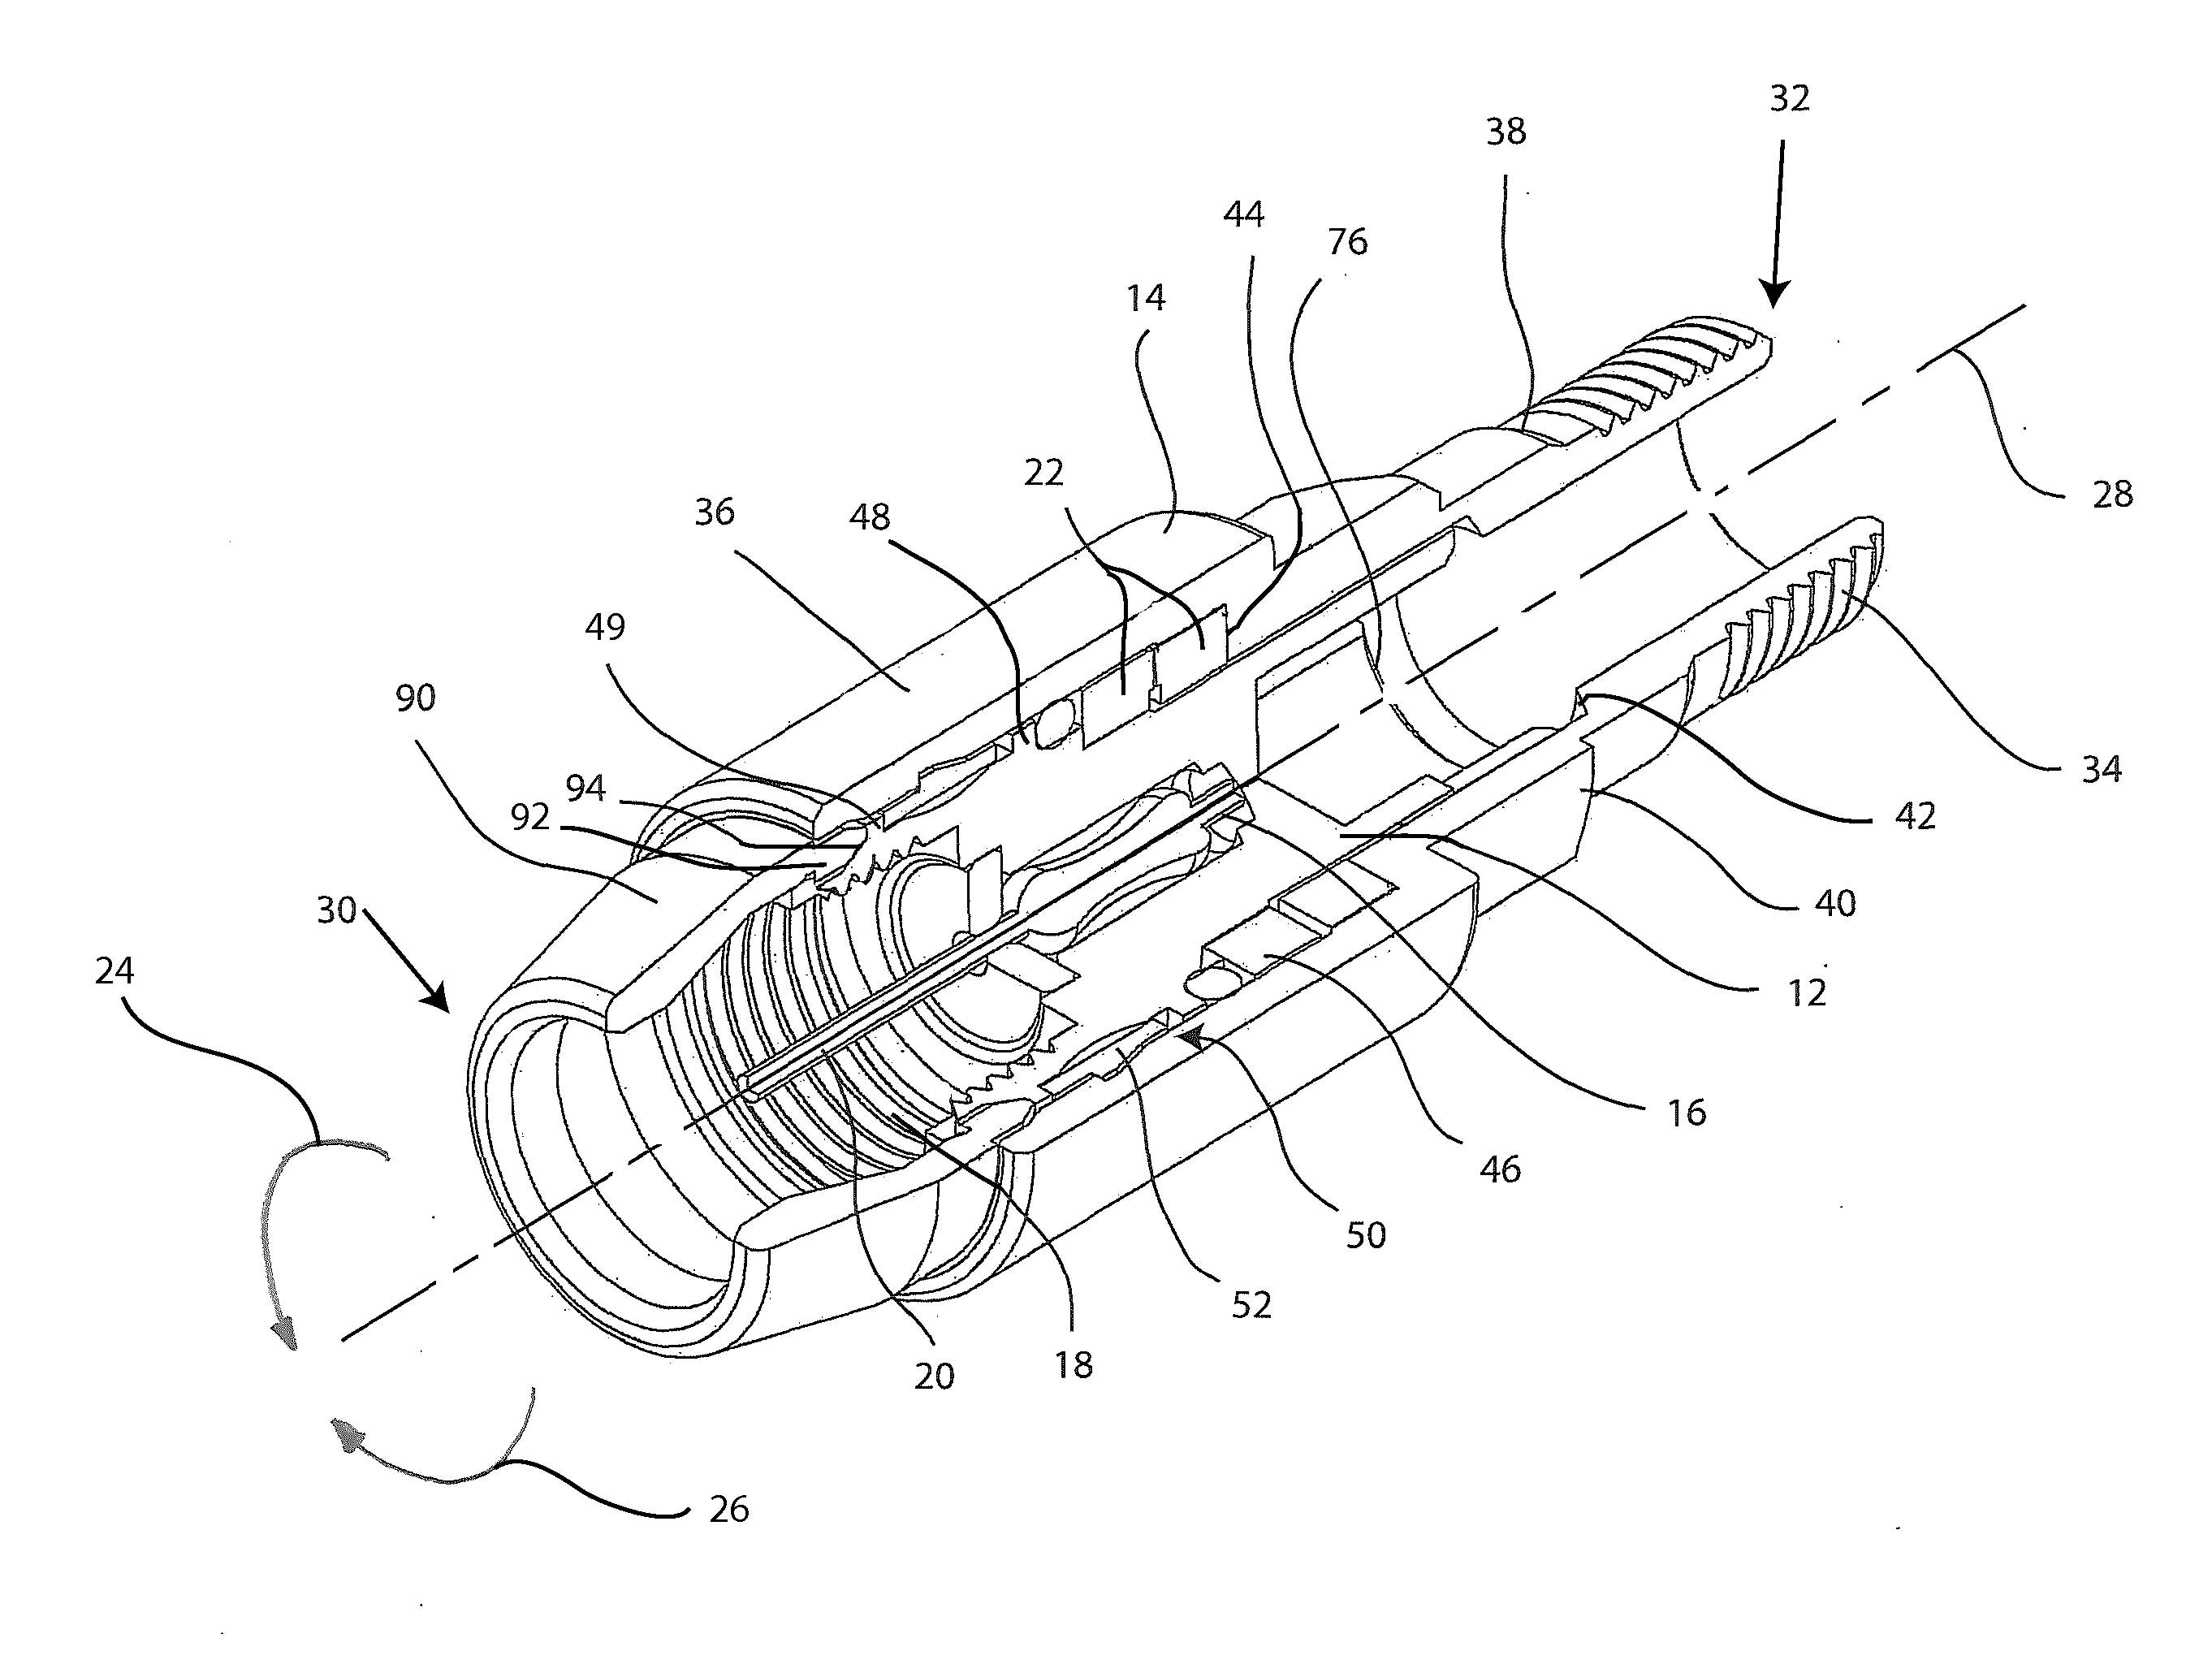 Coaxial cable port locking terminator and method of use thereof